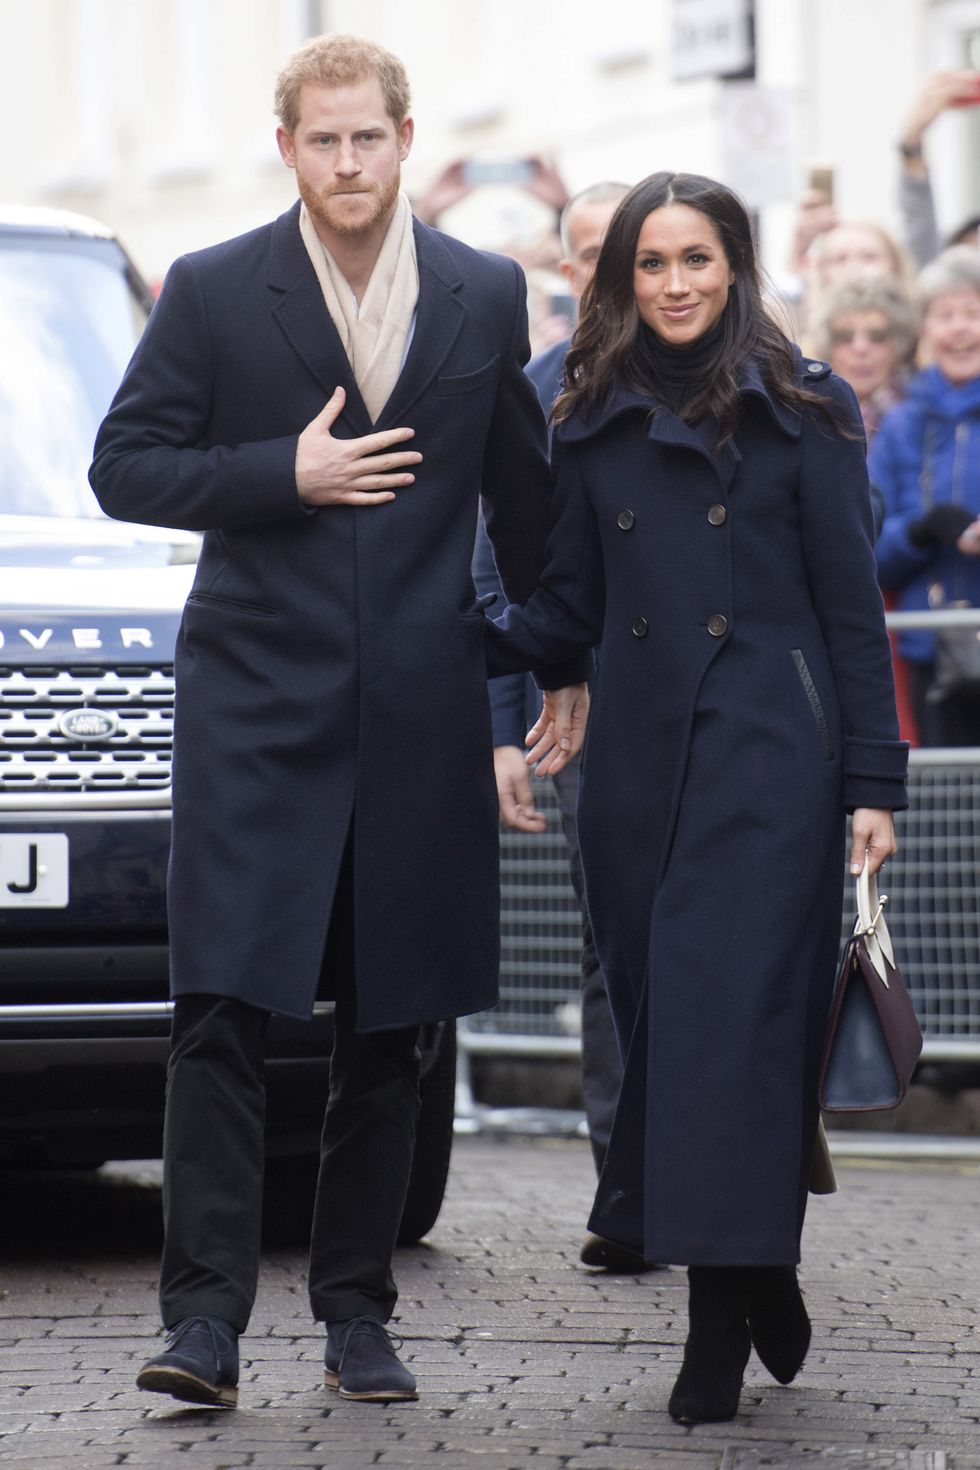 nottingham, england   december 01  prince harry and his fiancee, us actress meghan markle, visit nottingham for their first official public engagement together  on december 1, 2017 in nottingham, england  prince harry and meghan markle announced their engagement on monday 27th november 2017 and will marry at st georges chapel, windsor in may 2018  photo by jeremy selwyn   wpa poolgetty images